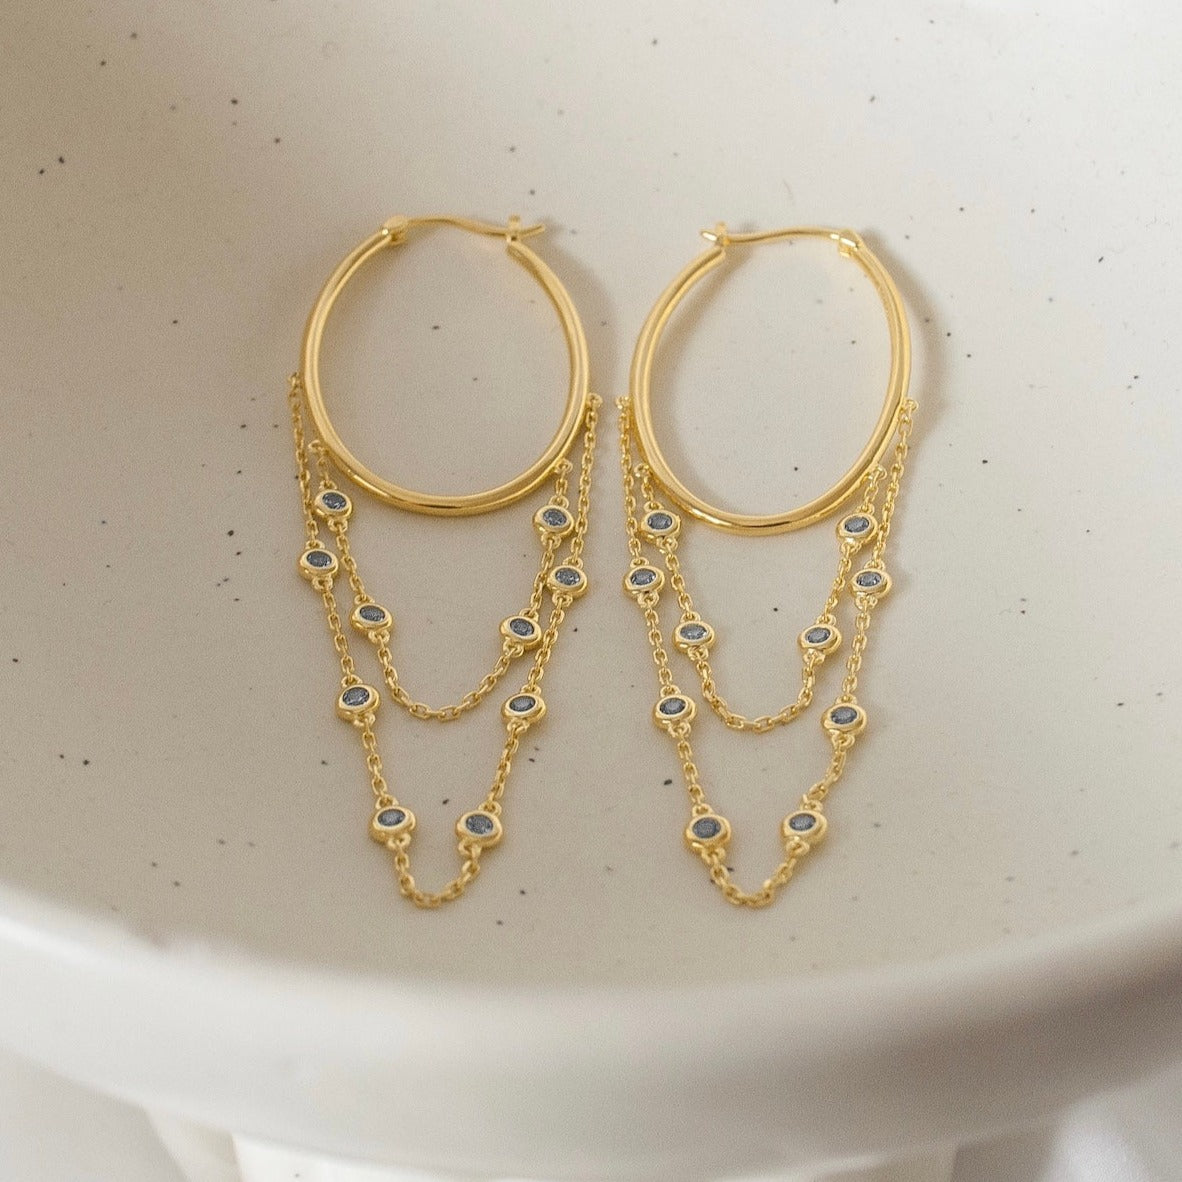 Mima earrings - gold plated